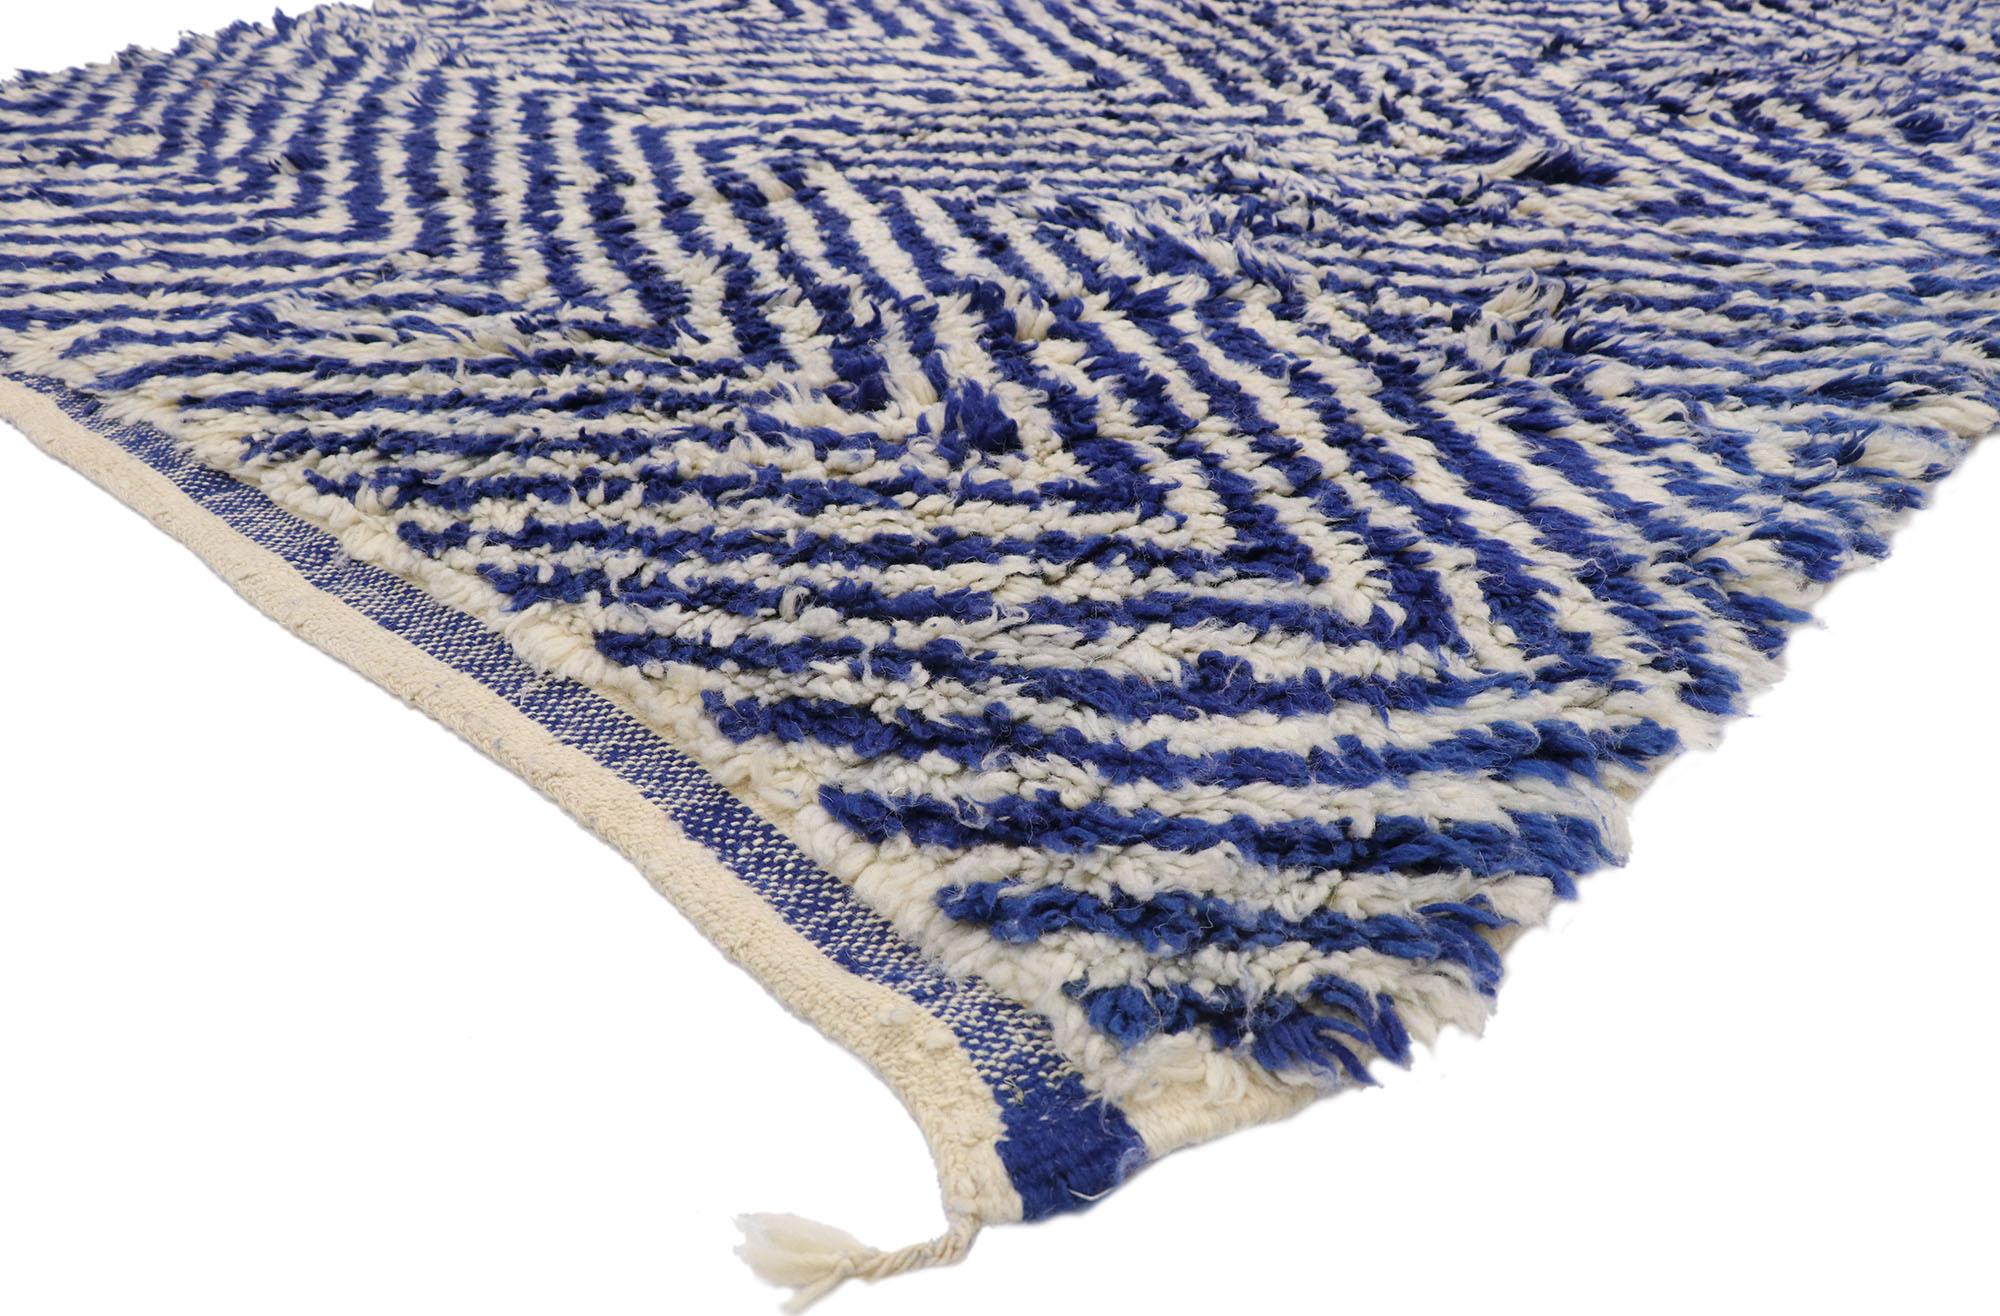 20974, vintage Berber Moroccan rug with Herringbone Chevron Design and Cozy Nautical style. Navy blue and white combined with the plush wool pile creates a cozy nautical vibe in this hand-knotted wool vintage Berber Moroccan rug. It features a